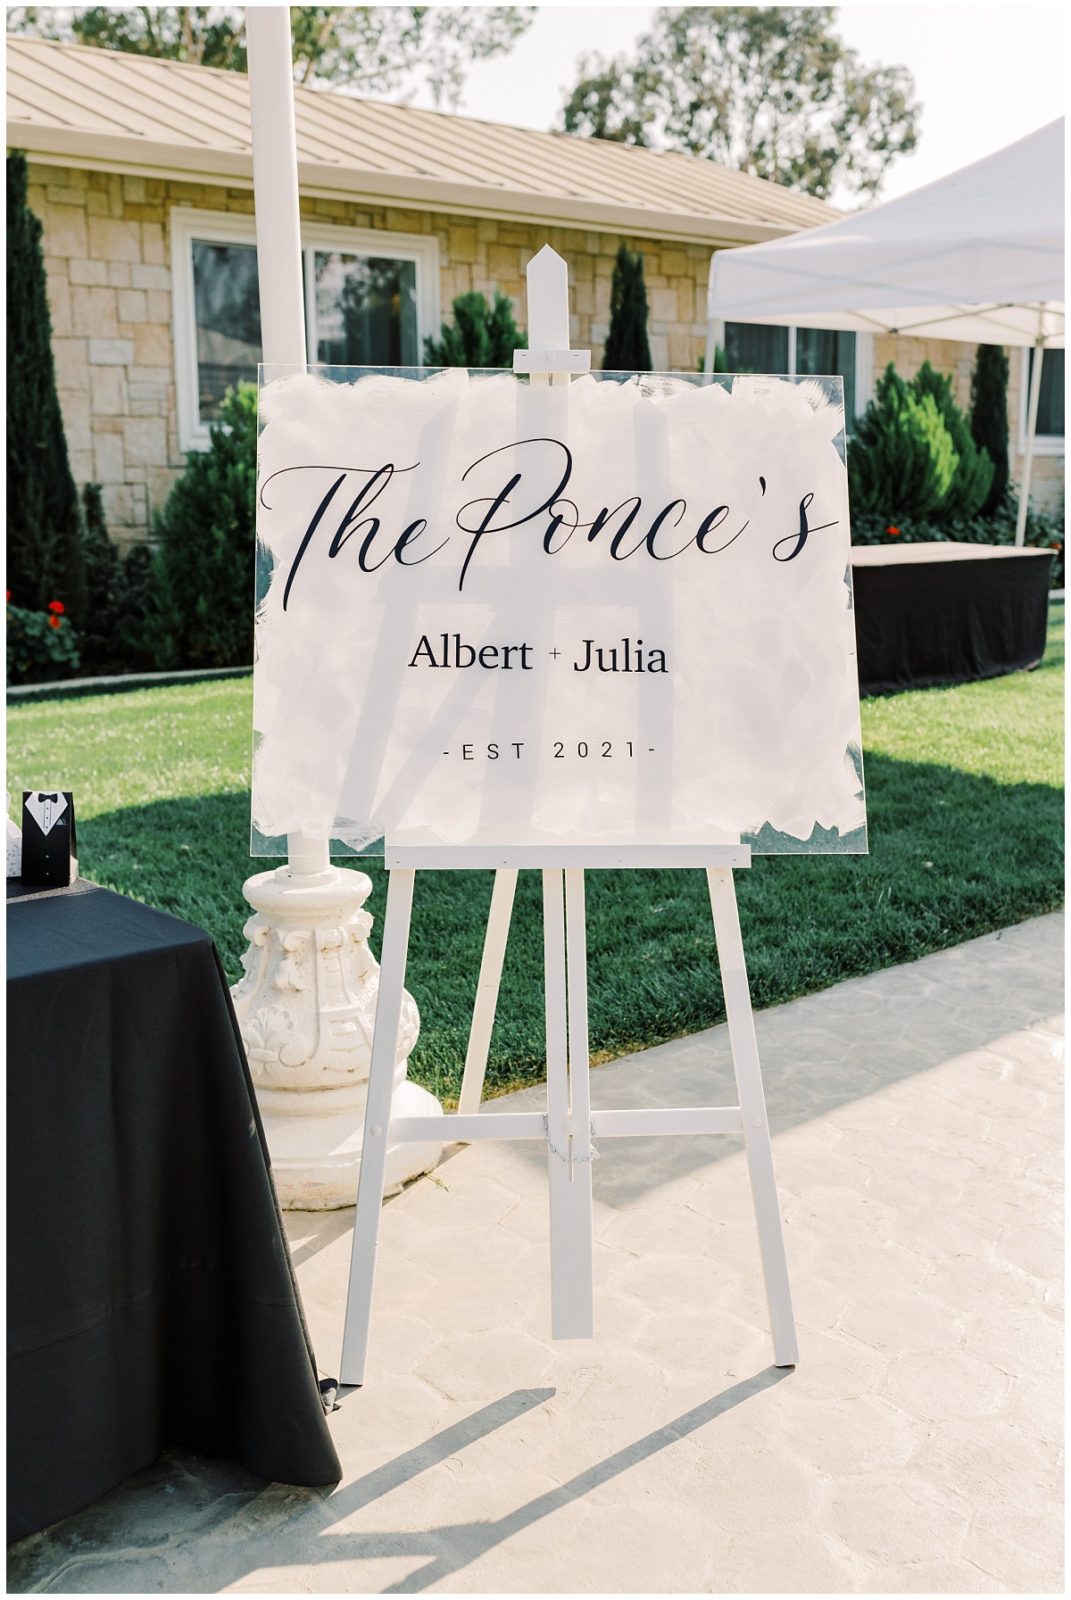 Classic Black and White Wedding Sign